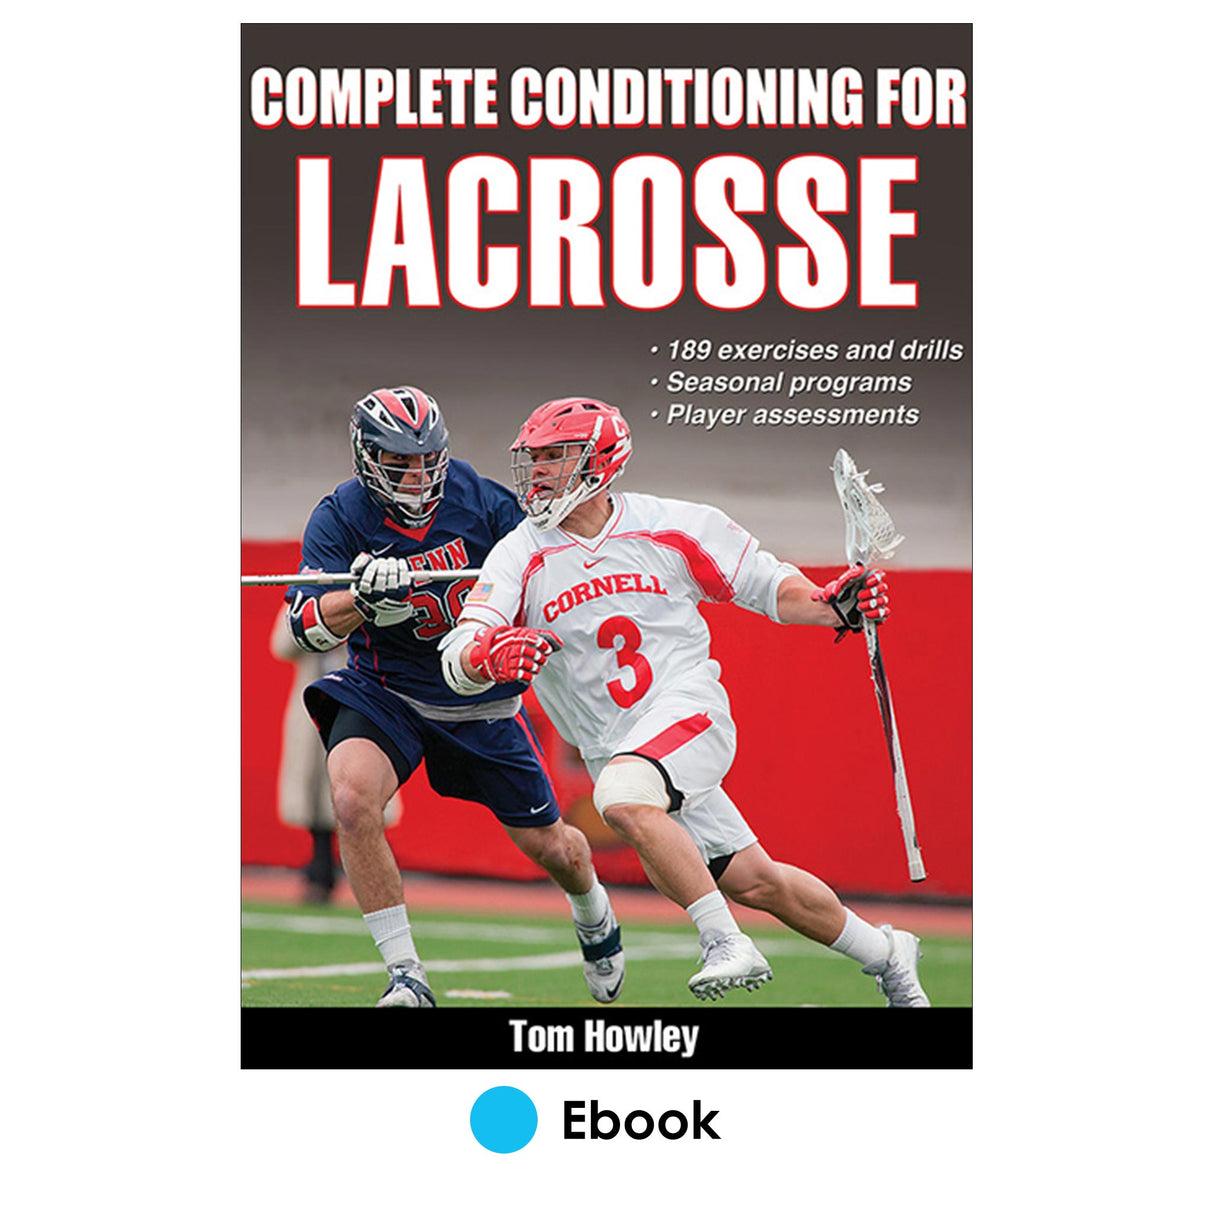 Complete Conditioning for Lacrosse PDF